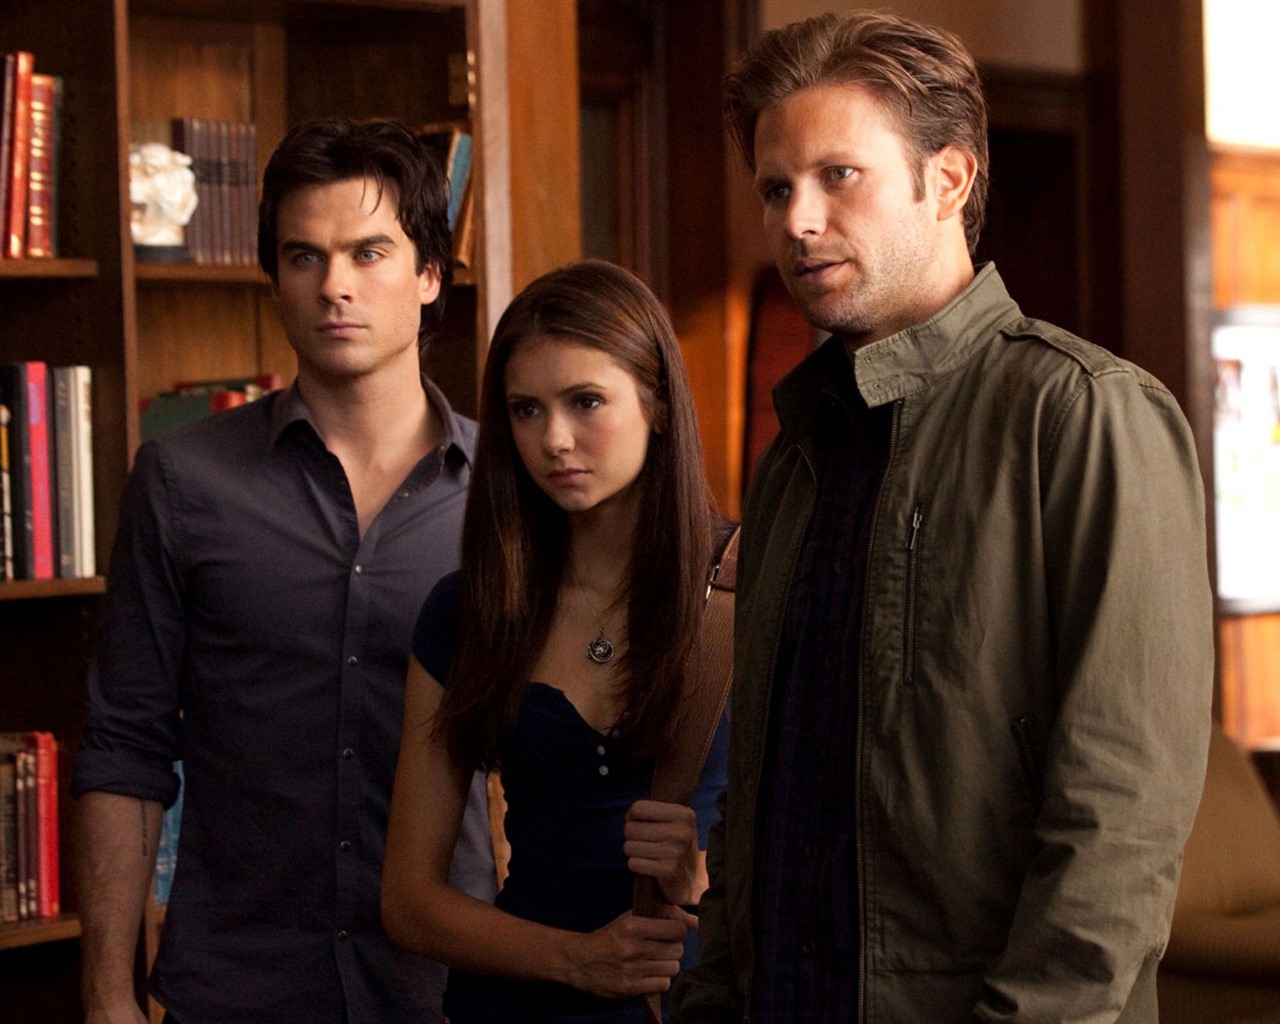 The Vampire Diaries HD Wallpapers #2 - 1280x1024